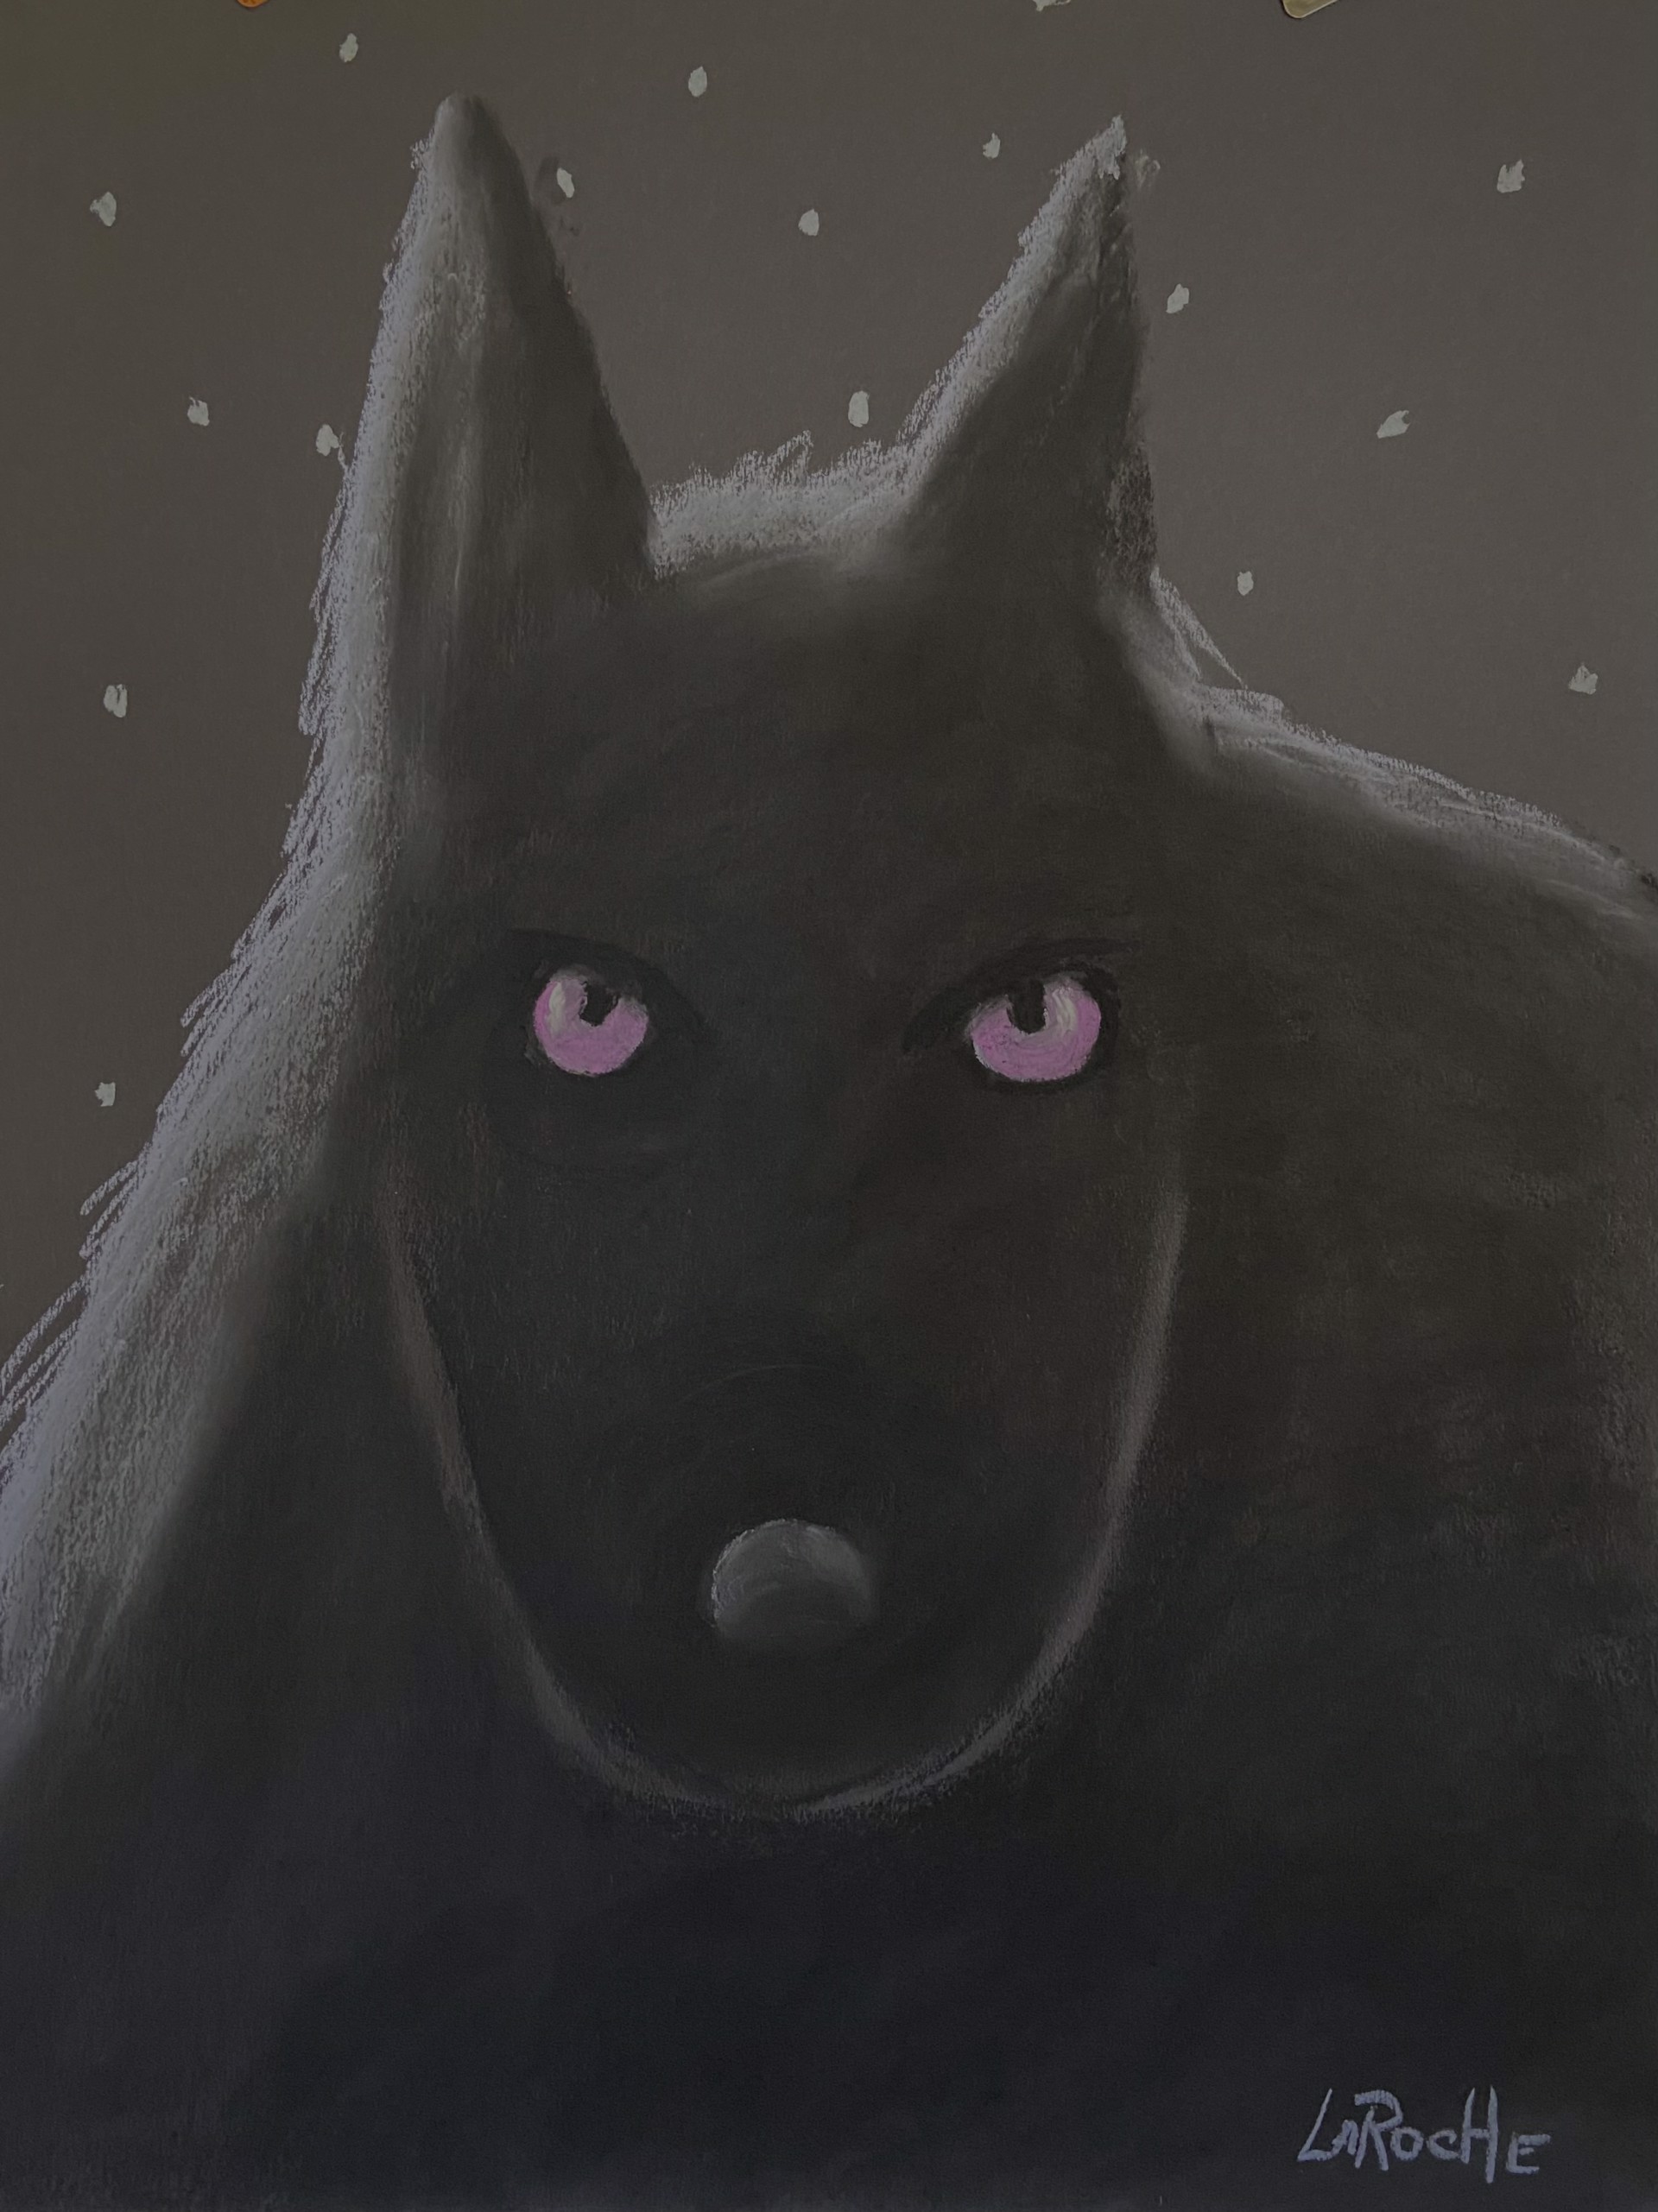 The Pack: Midnight Wolf by Carole LaRoche